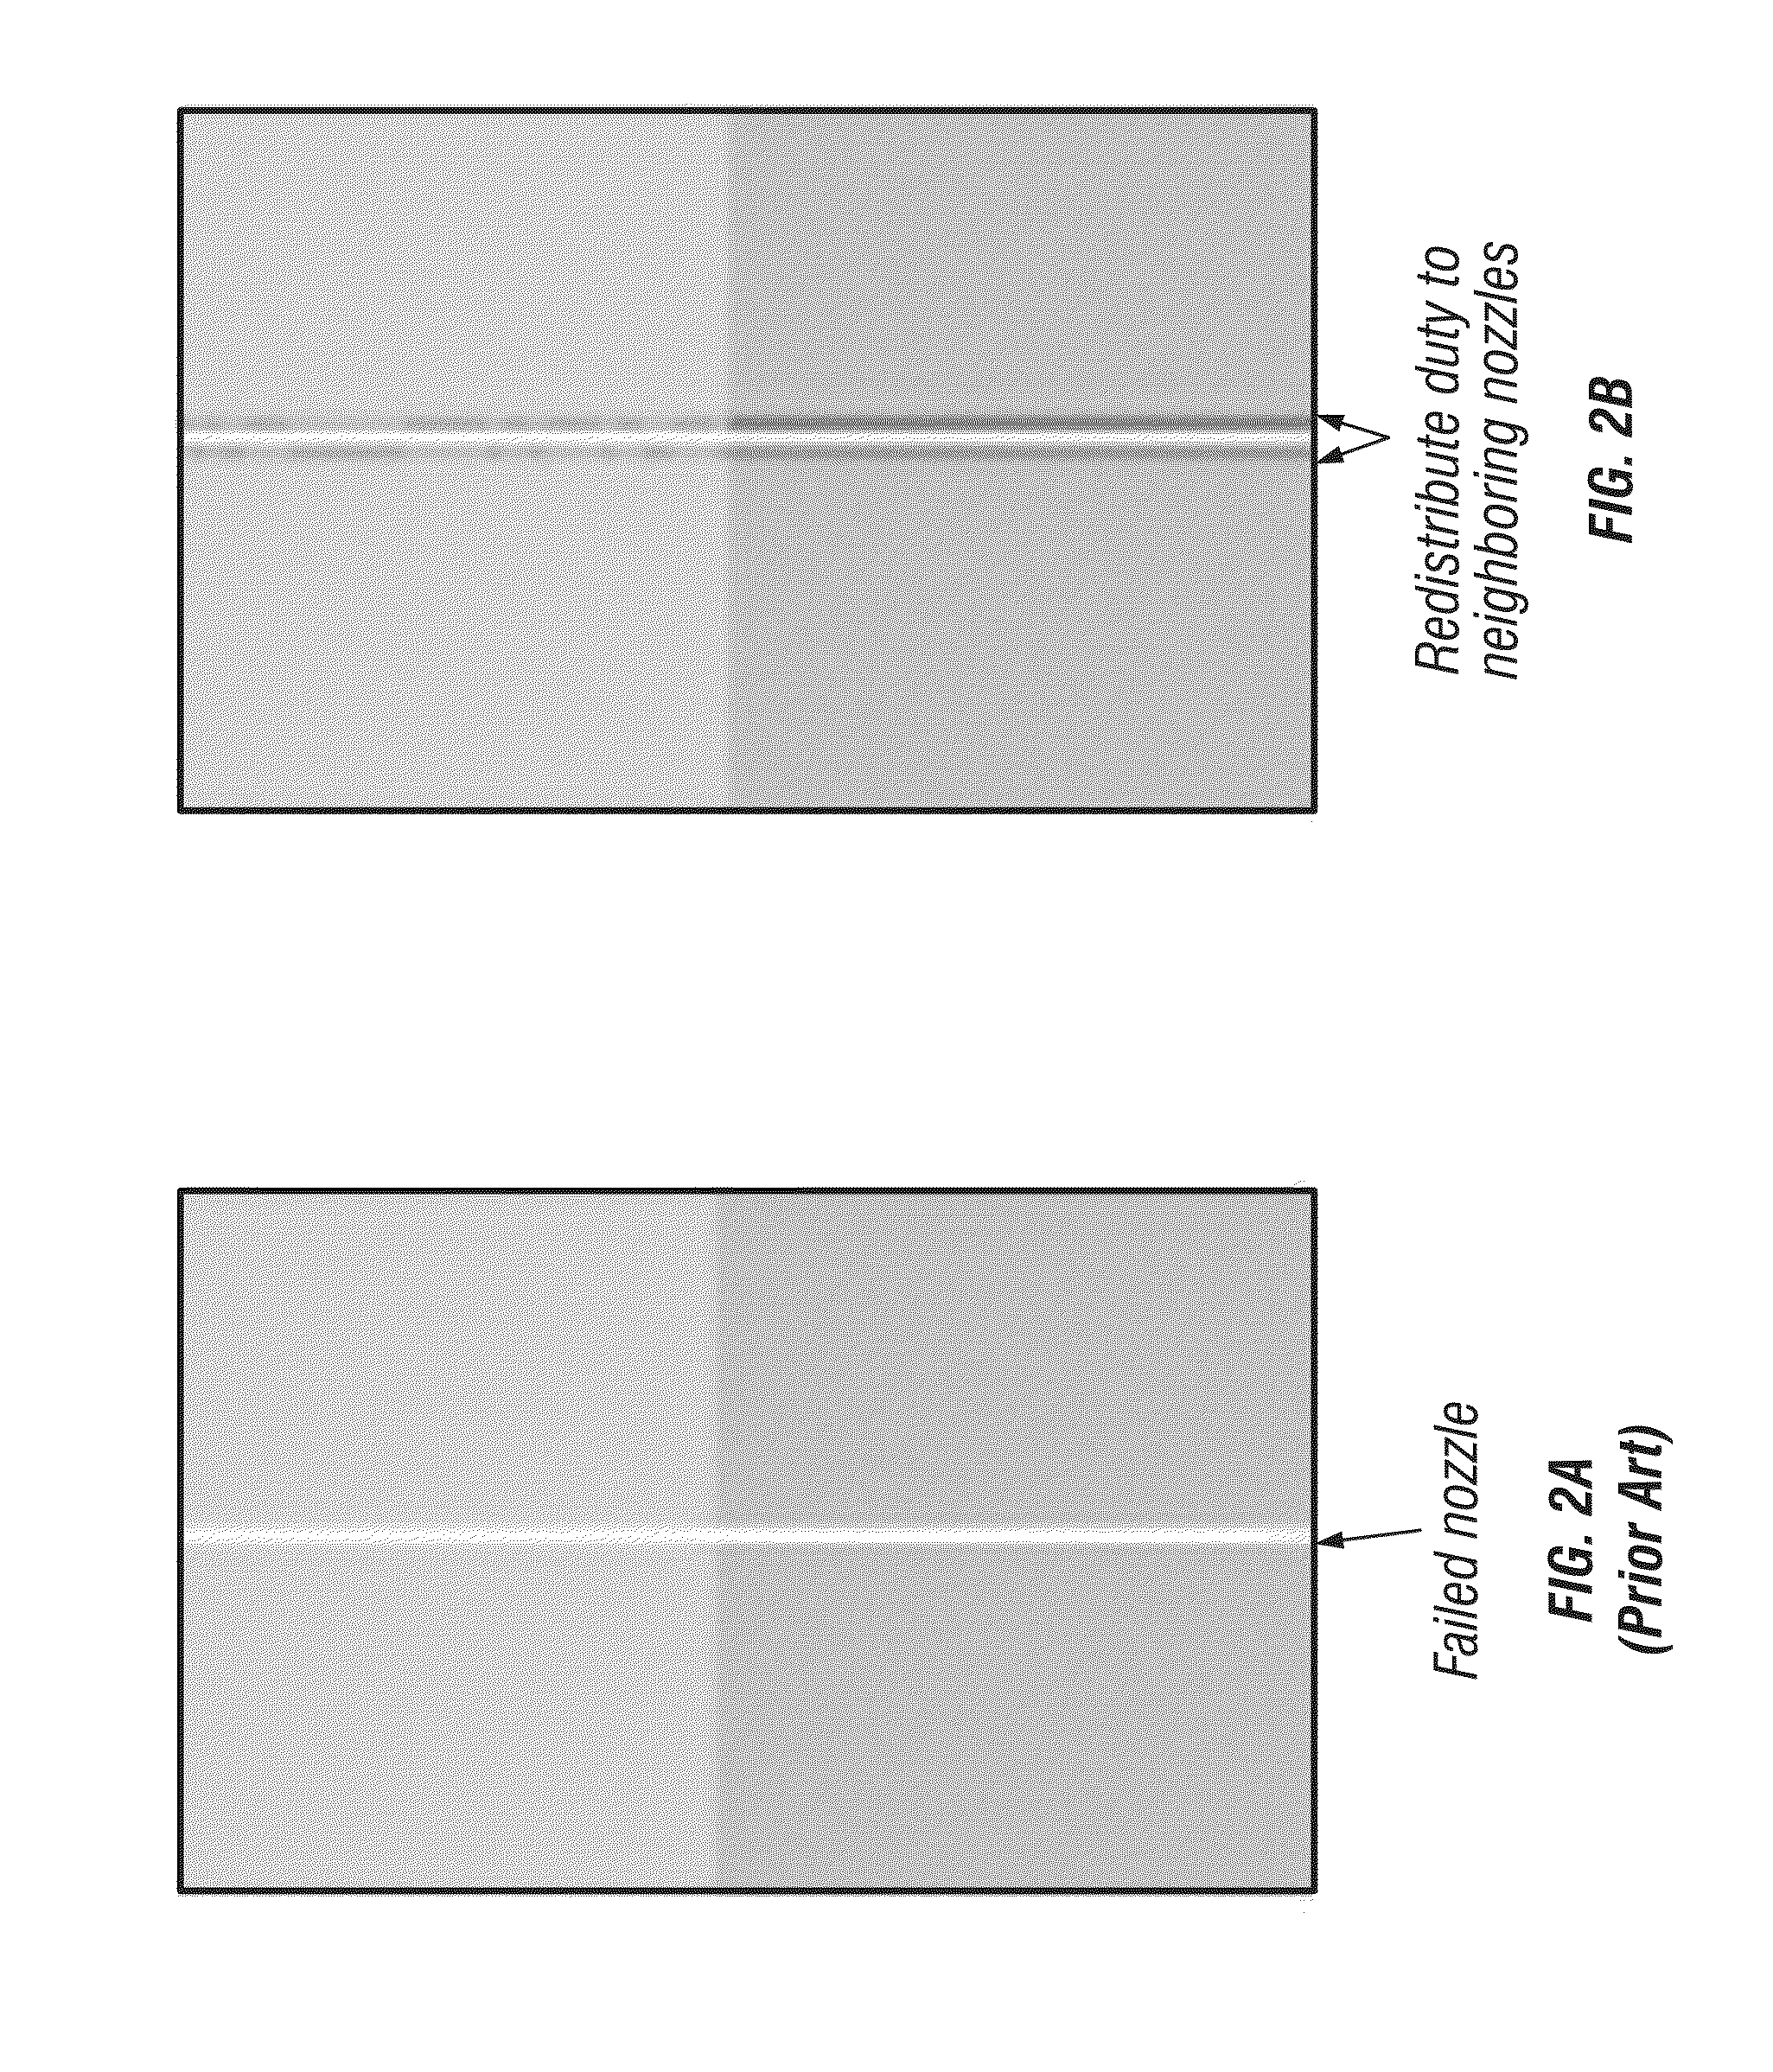 Method and apparatus for single-pass failed nozzle compensation